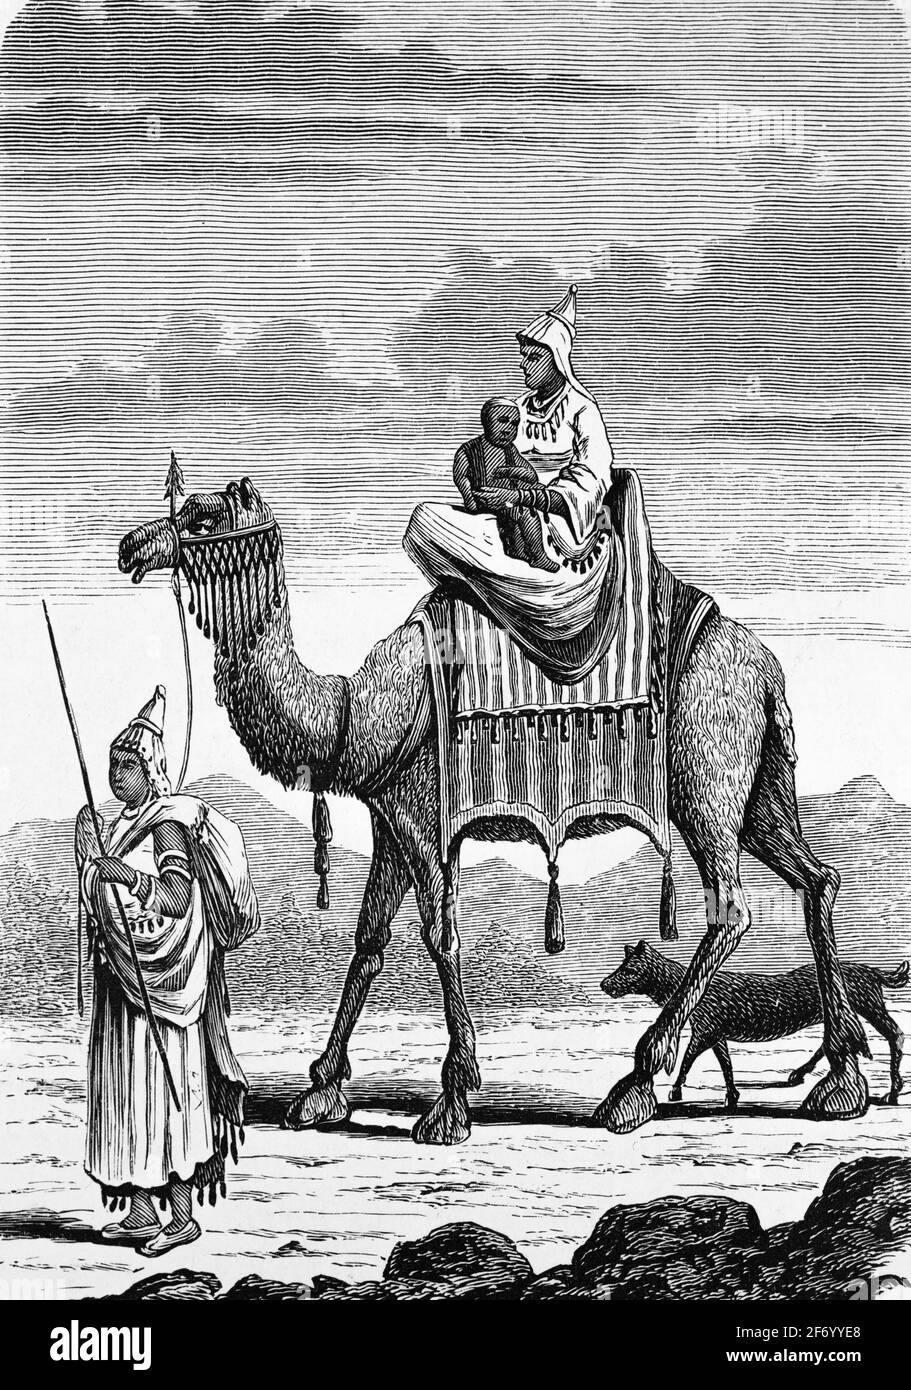 Banjara women on their way in Rajasthan, one woman sitting on a camel with her little baby, wood engraving, Wien. Leipzig 1881 Stock Photo